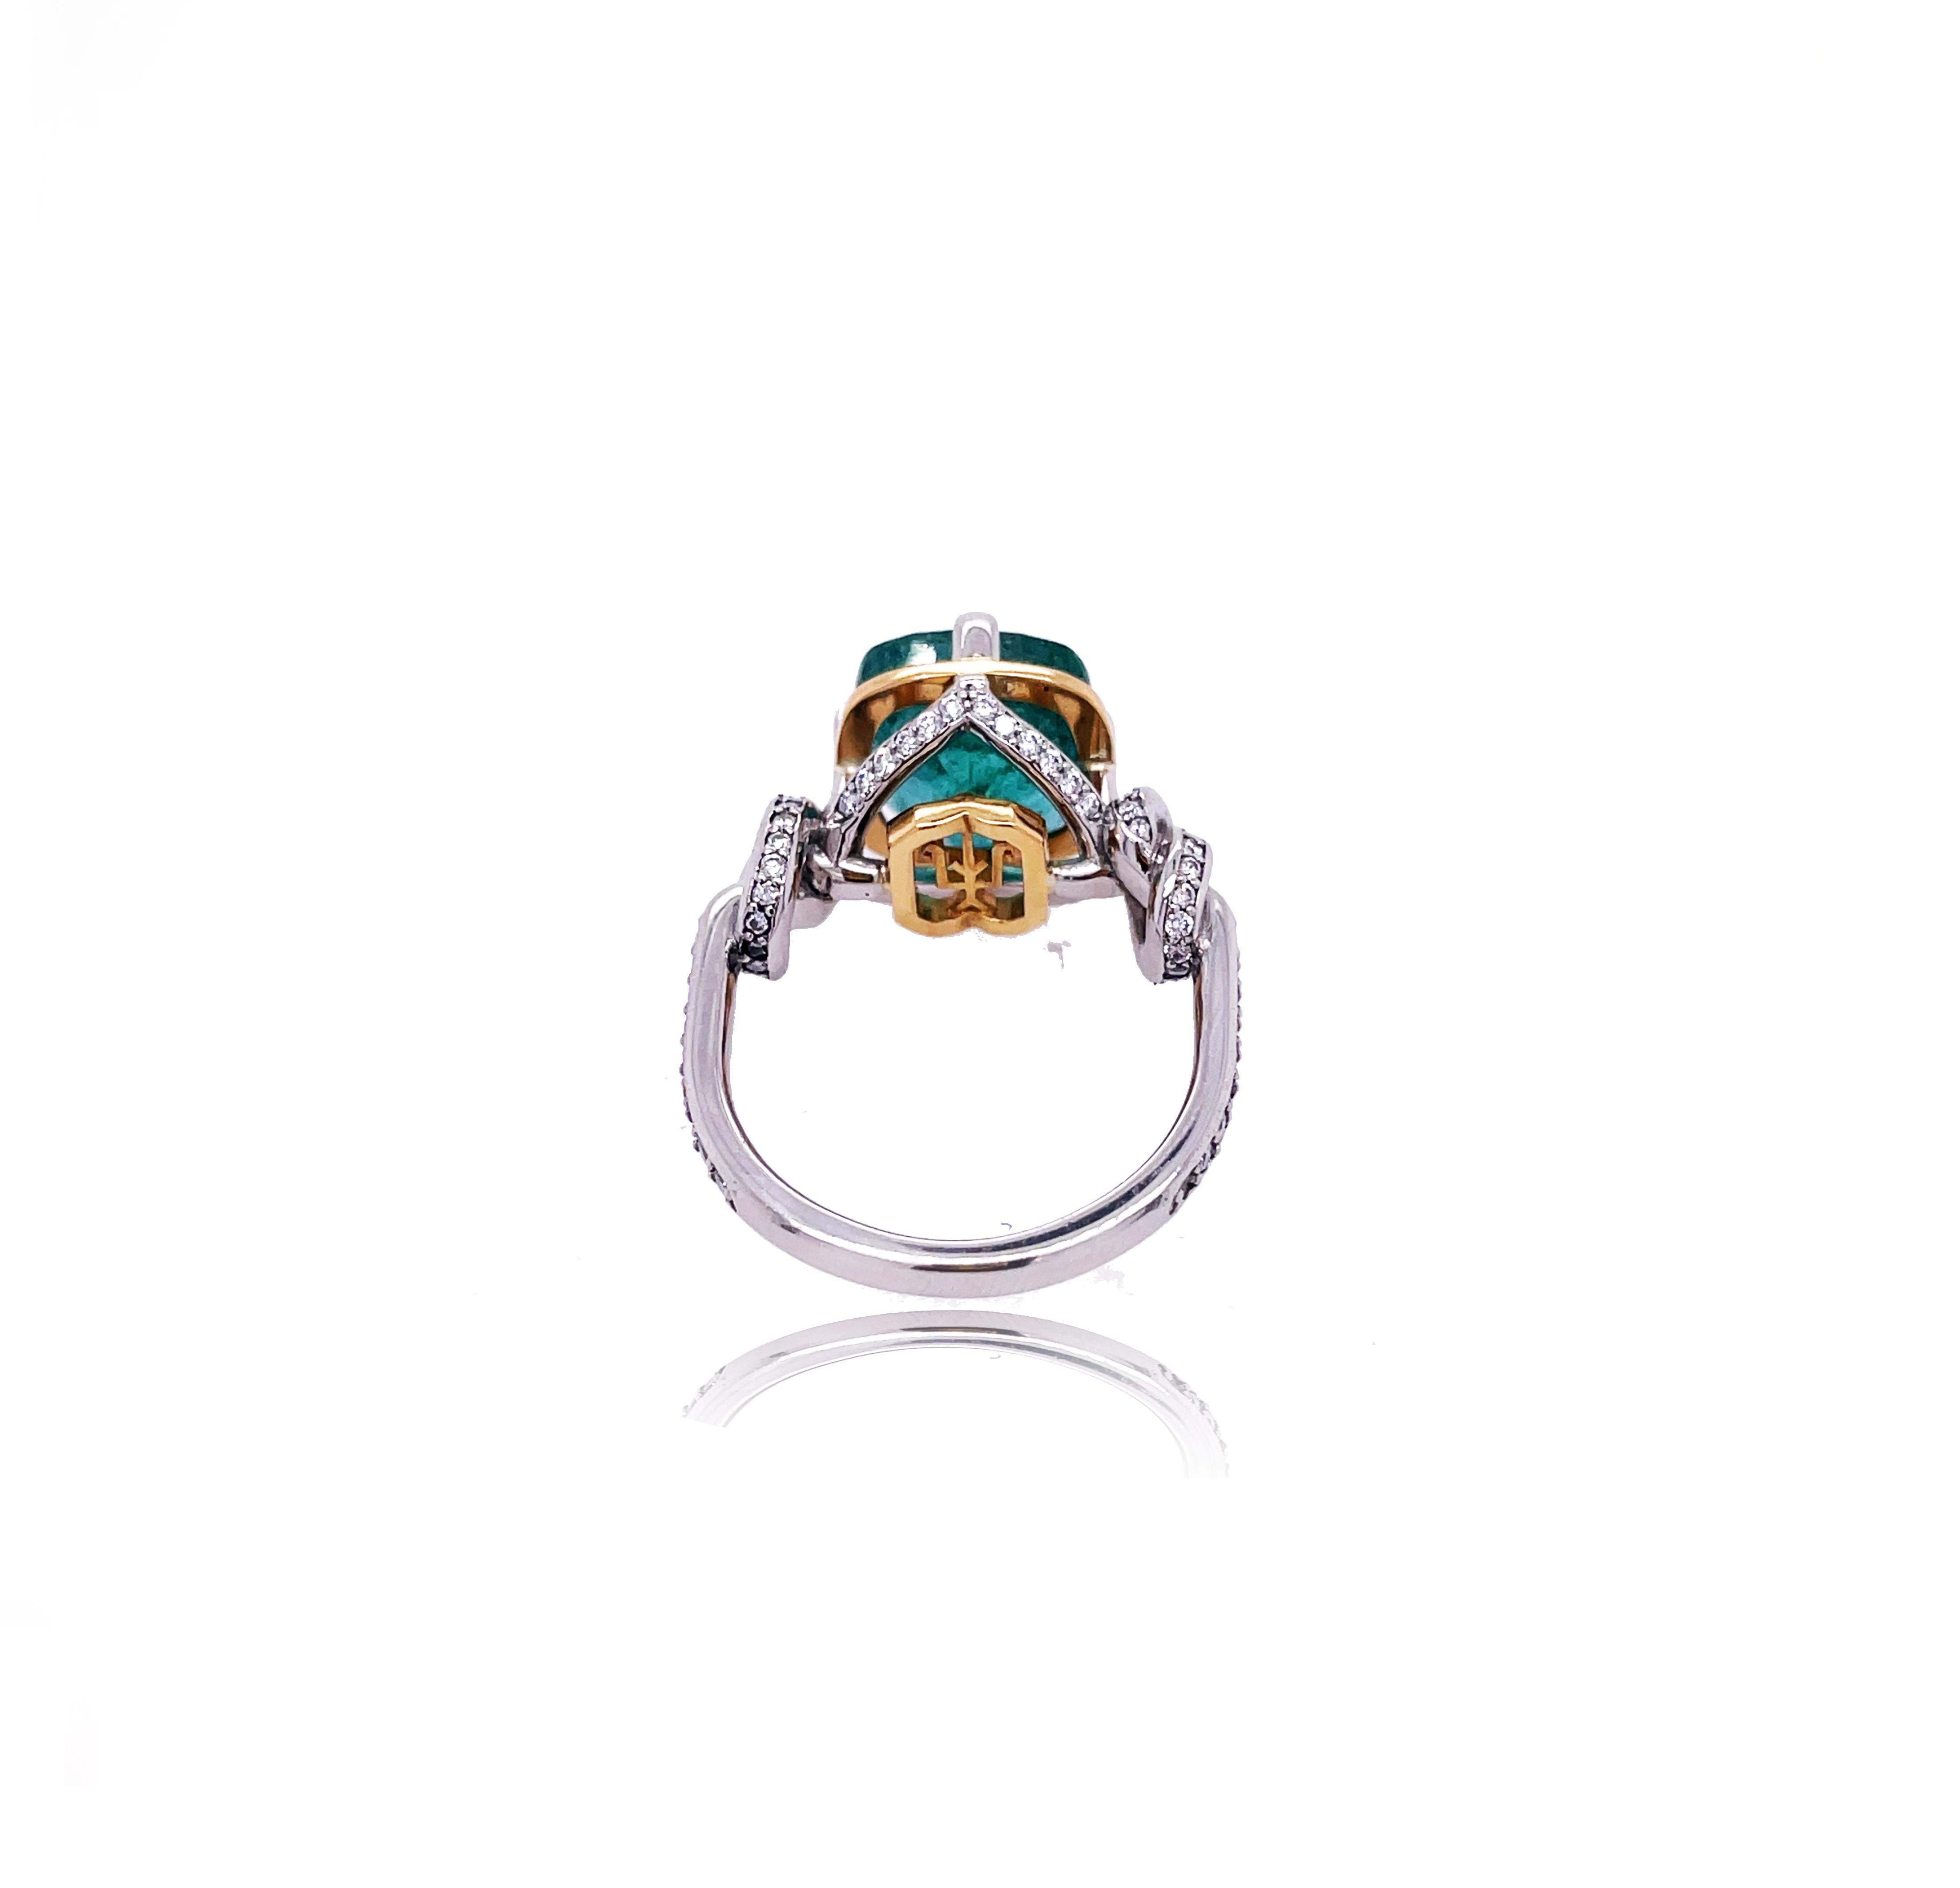 For Sale:  4.96ct Natural Cushion Cut Emerald and Diamond Ring in platinum and 22k gold 3